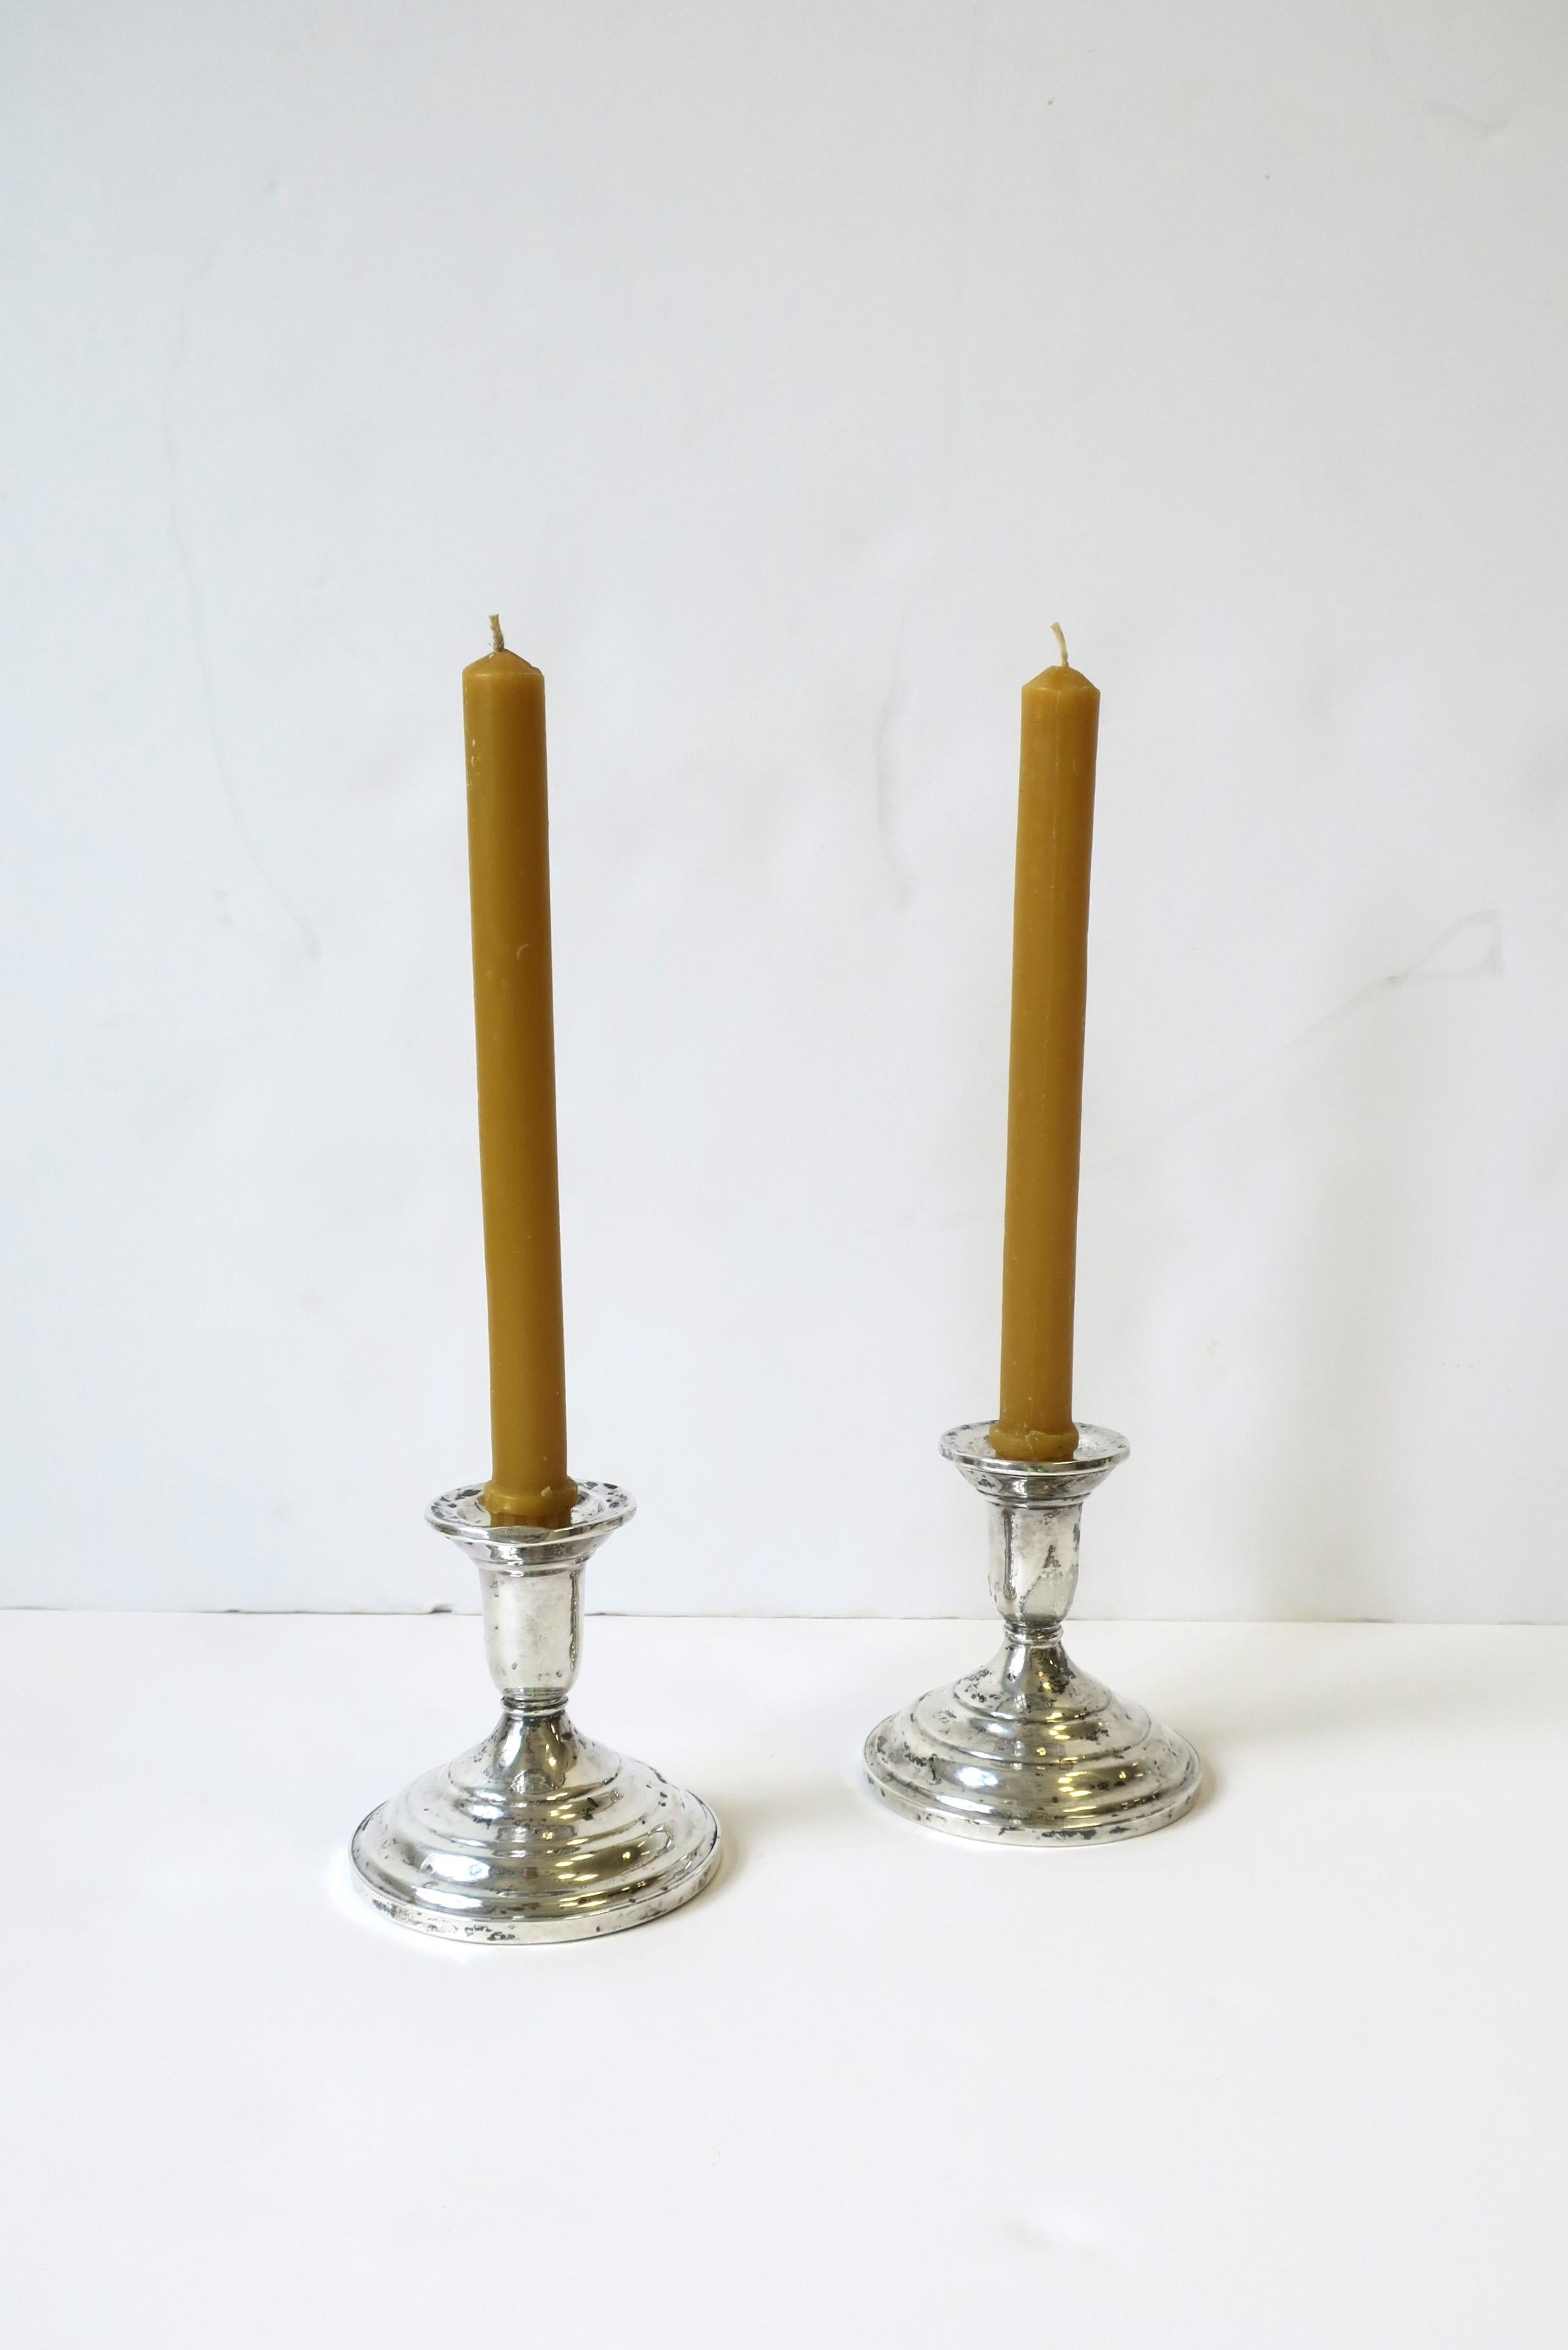 20th Century Sterling Silver Candlesticks Candlestick Holders, Pair, circa 1960s For Sale